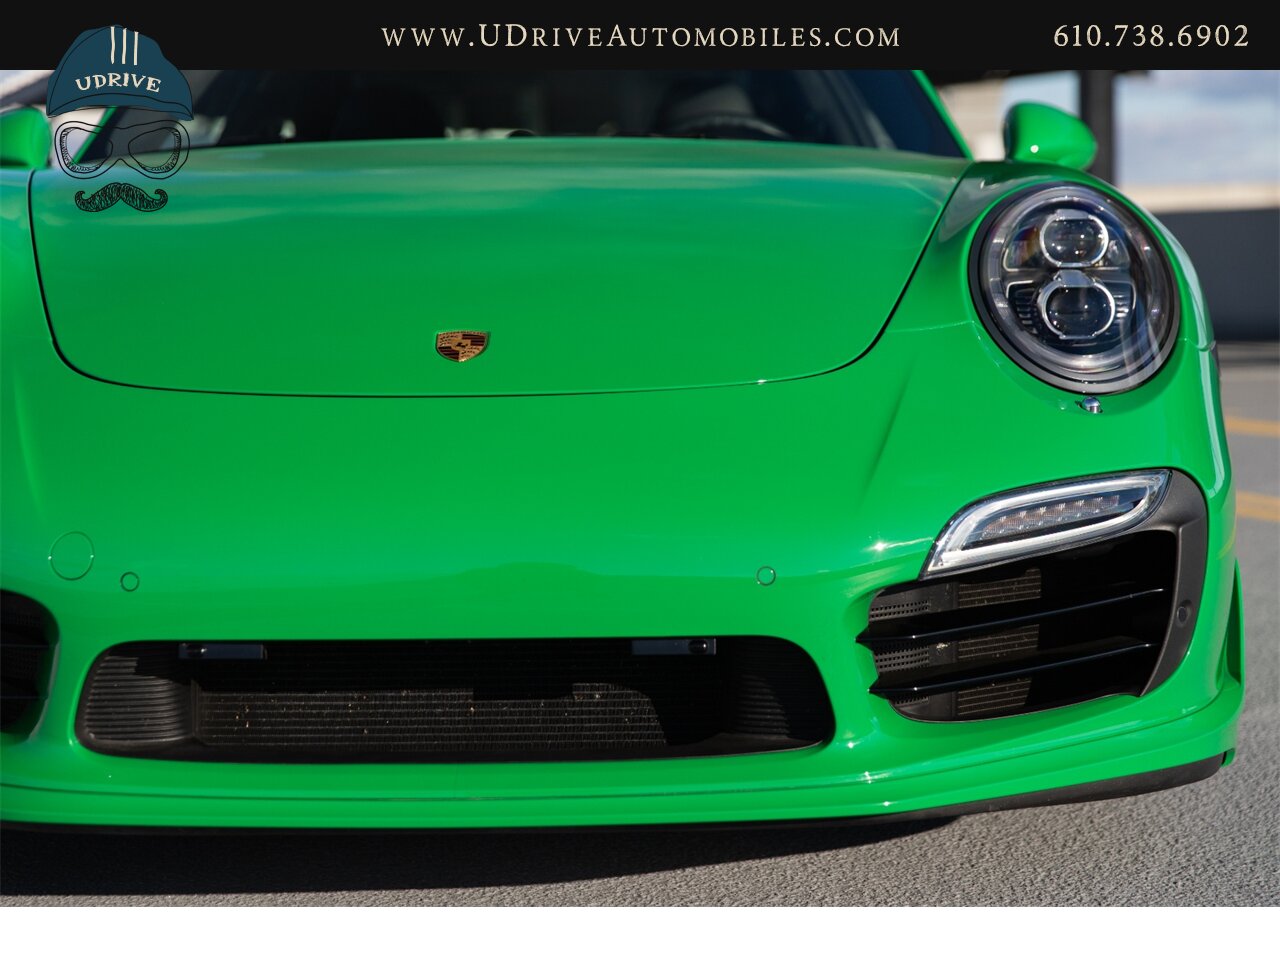 2016 Porsche 911 Turbo S PTS Viper Green Aerokit $203k MSRP  Painted Side Skirts Painted Grilles Wheels in Black - Photo 10 - West Chester, PA 19382